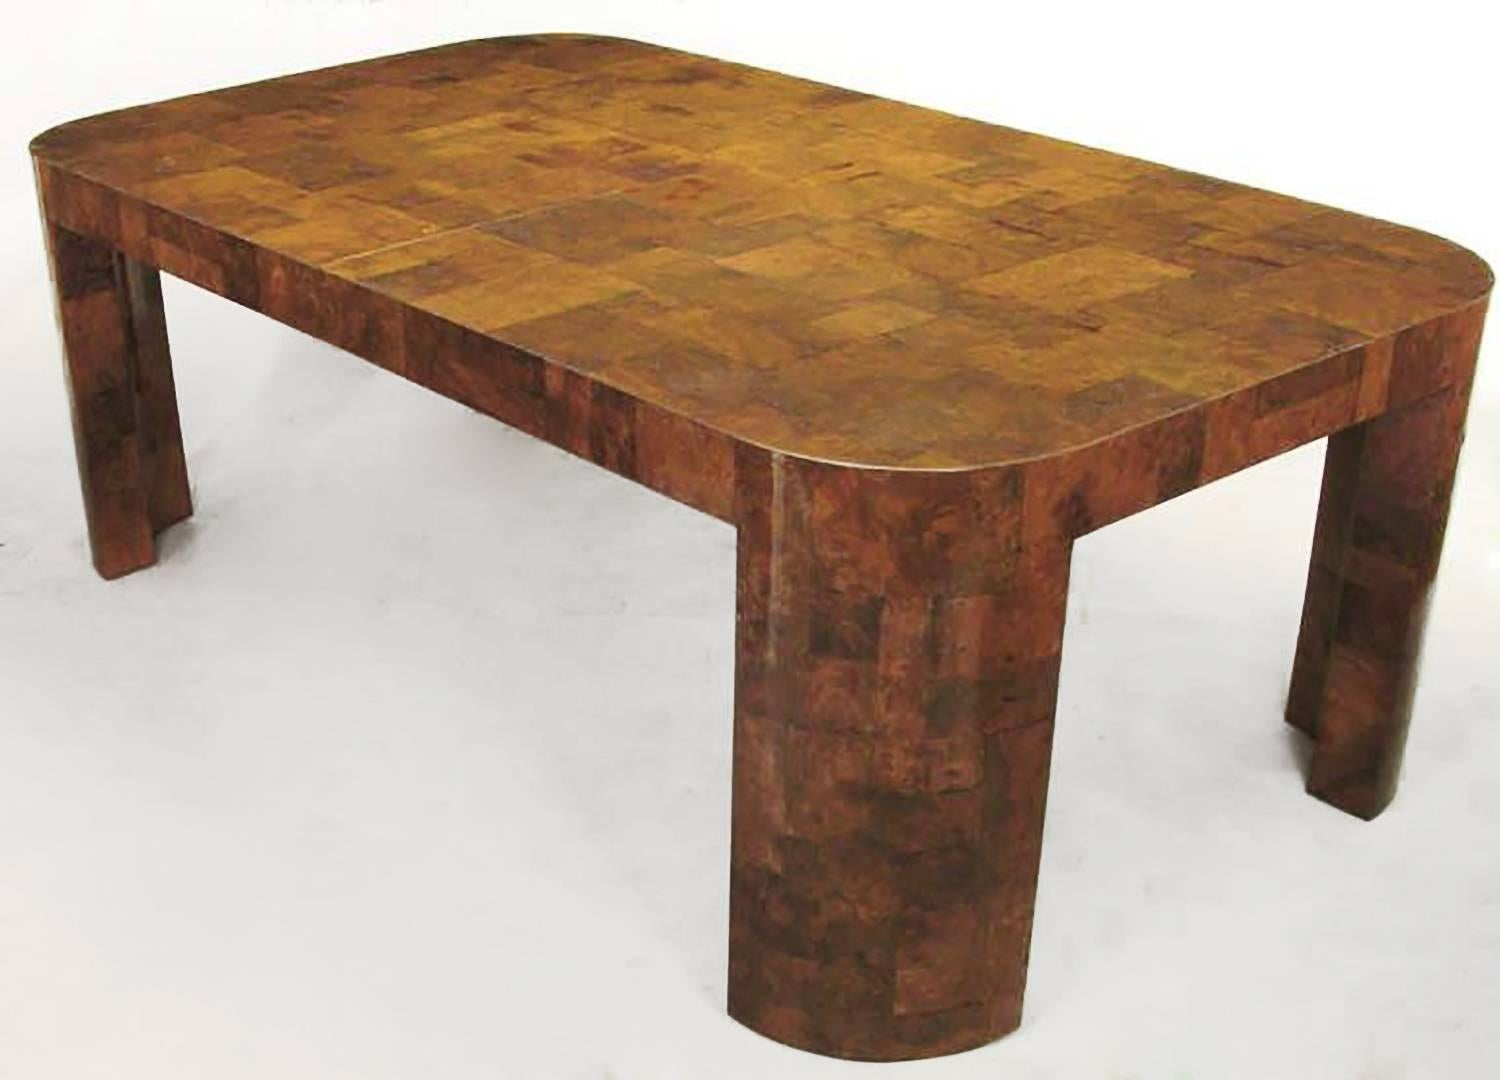 An excellent example of the modern elegance that was Paul Evans' work for Directional in the late 1960s through the middle 1970s. This patchwork dining table in burled walnut has radius corners and legs. The Fine burled walnut veneer of various